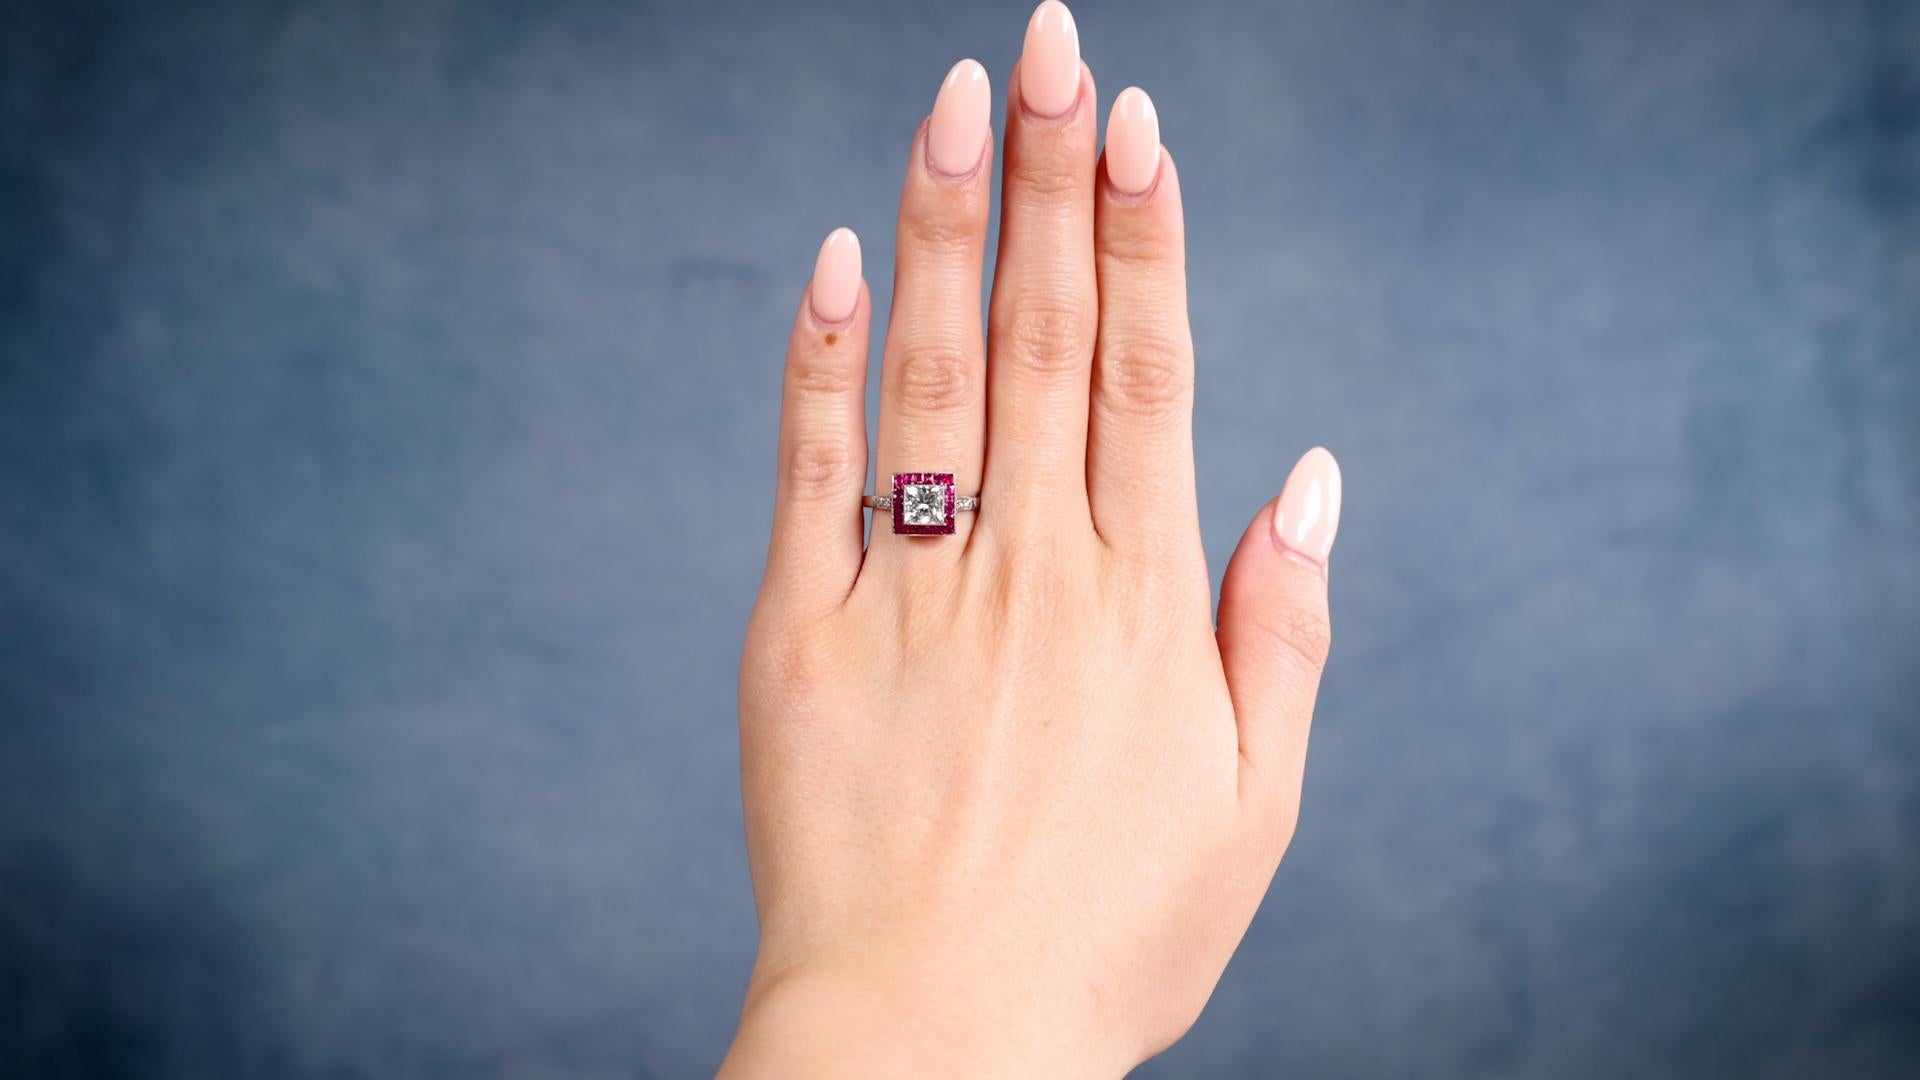 One Art Deco Inspired Princess Cut Diamond Ruby Platinum Target Ring. Featuring one princess cut diamond weighing approximately 1.15 carats, graded J color, VS1 clarity. Accented by 20 French cut rubies with a total weight of approximately 0.80